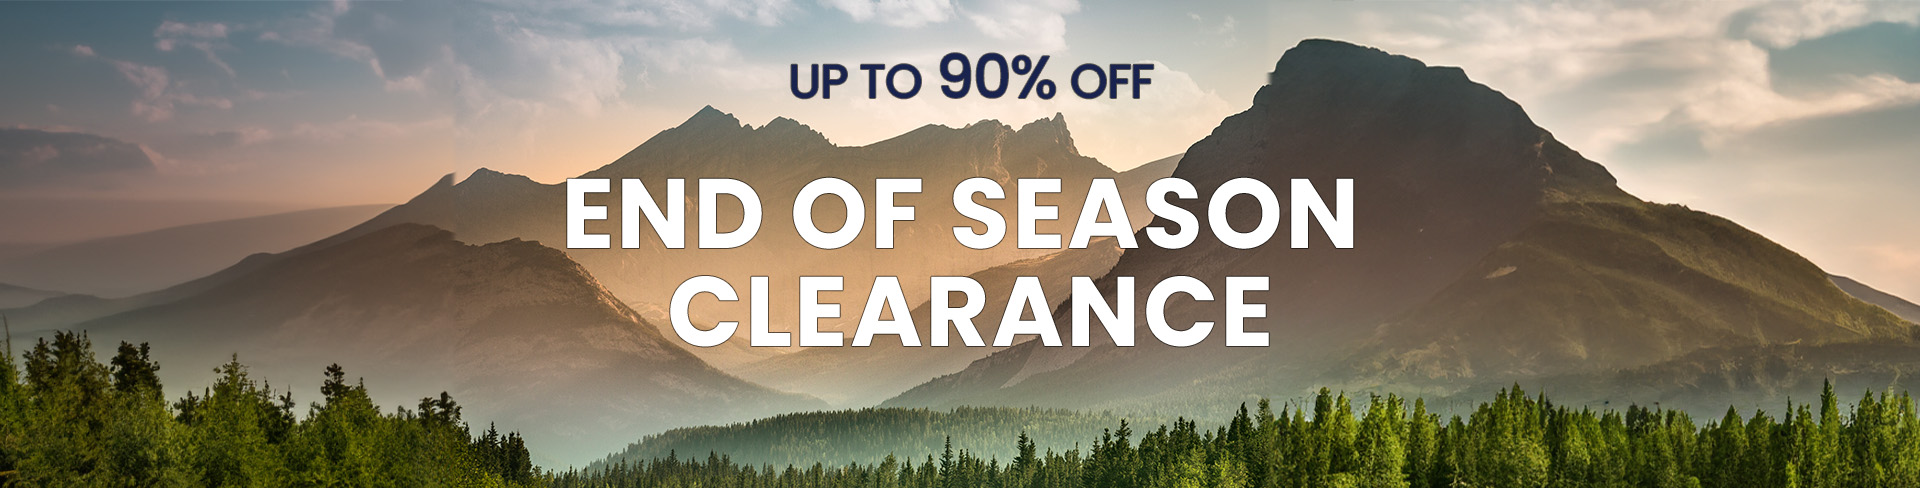 Women's Outerwear: UP TO 90% Off